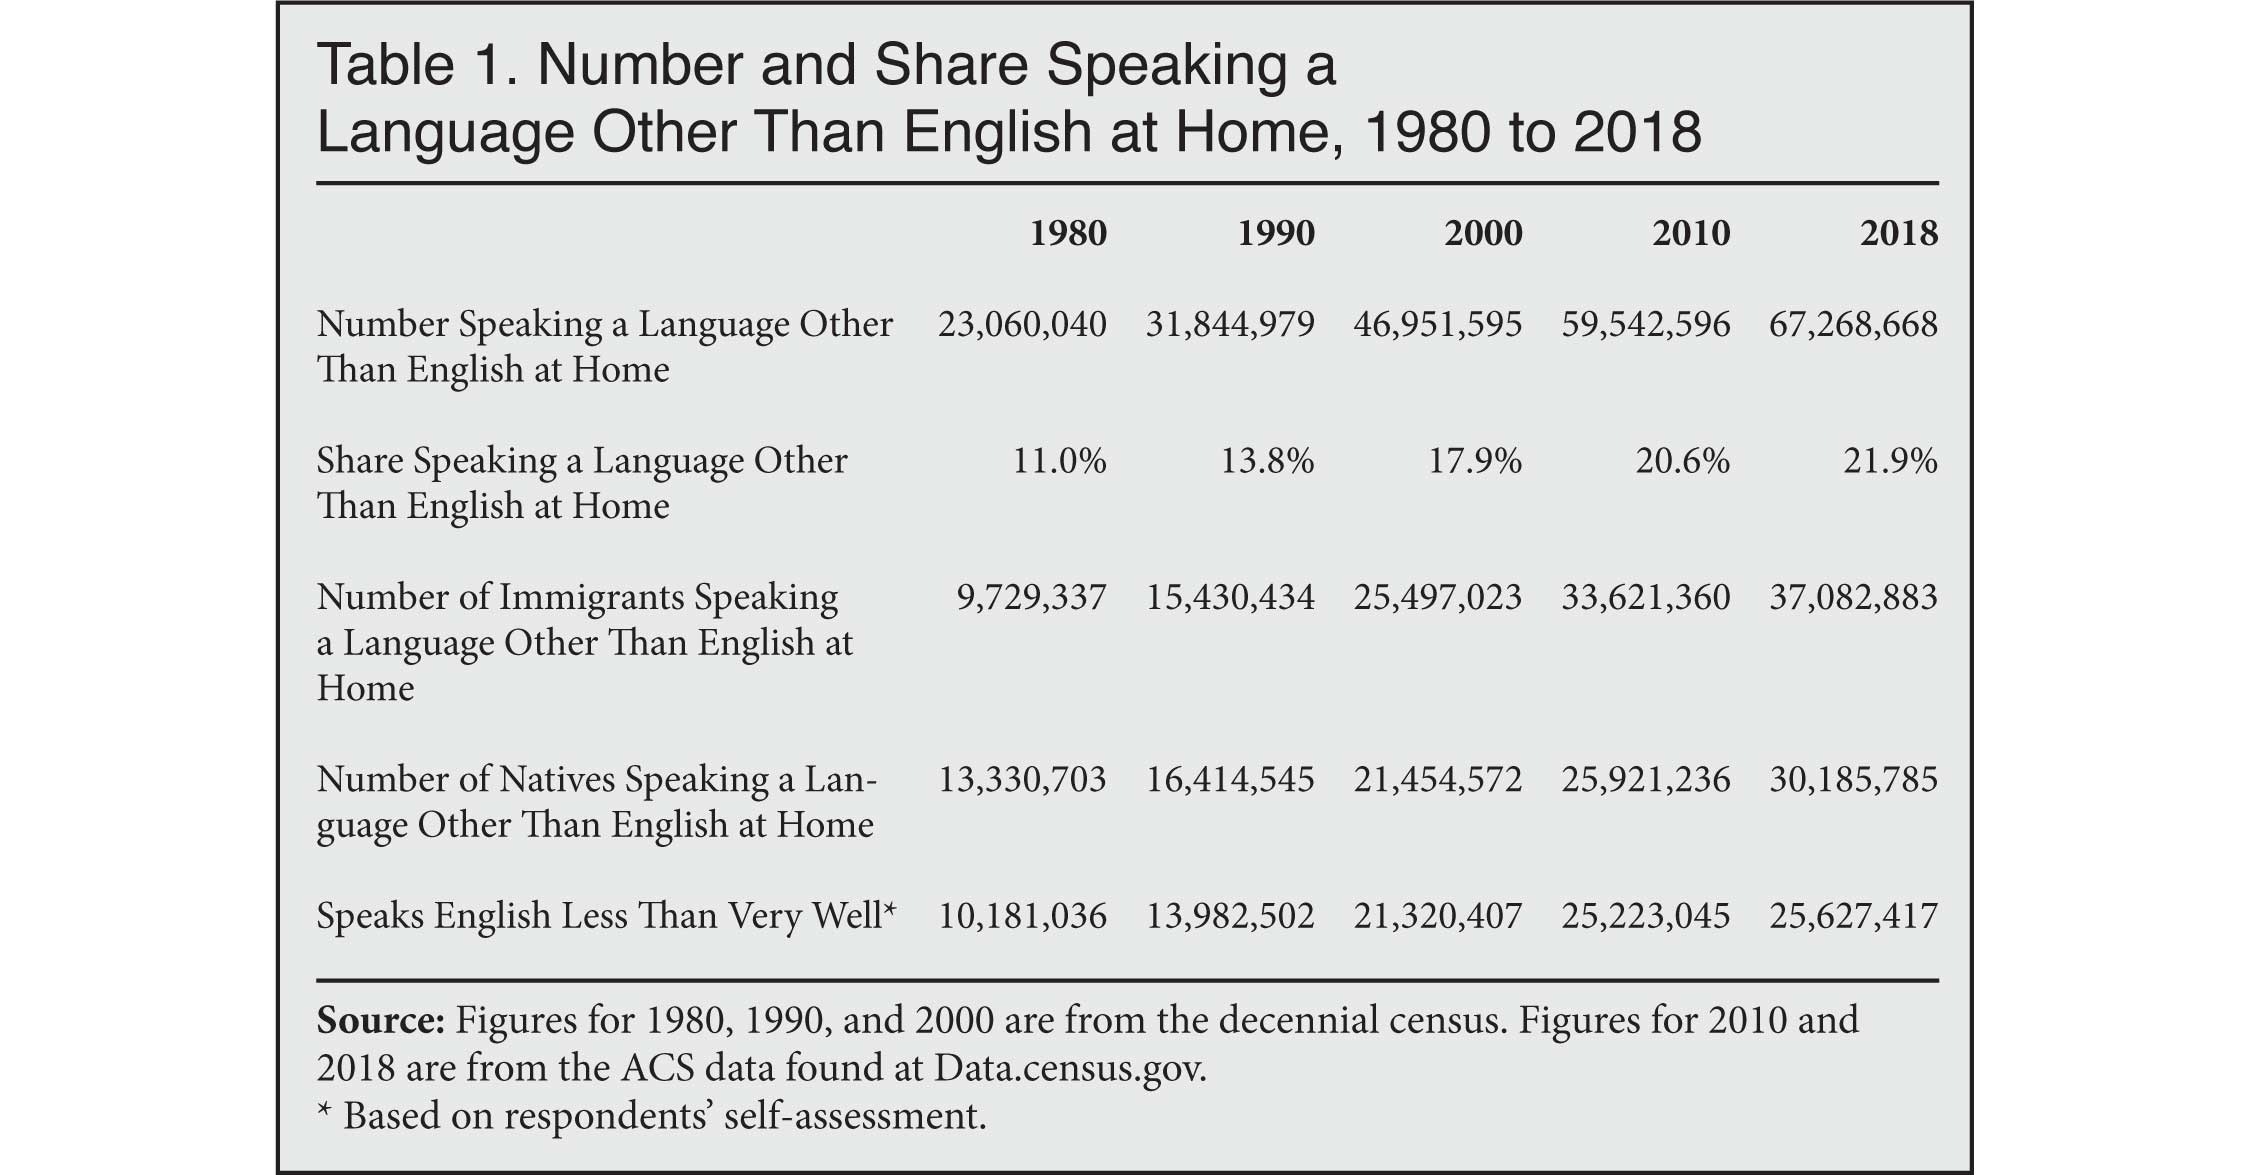 Table: Number and Share Speaking a Language other than English at home, 1980 to 2018